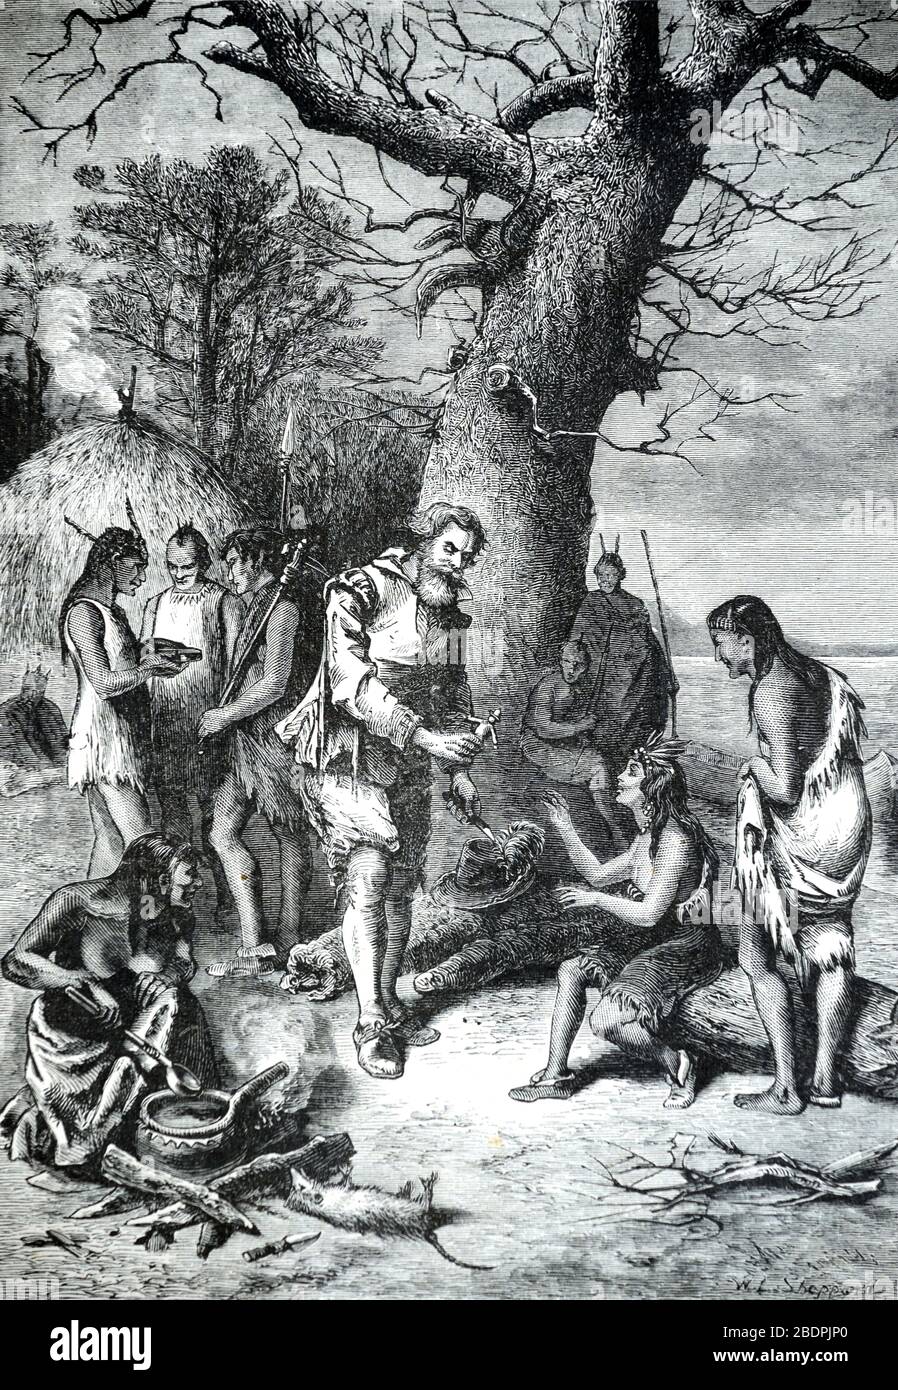 Spanish Conquistadors Meeting Native American Indians, Amazonian Indians or Indigenous People in South America. Vintage or Old Illustration or Engraving 1886 Stock Photo